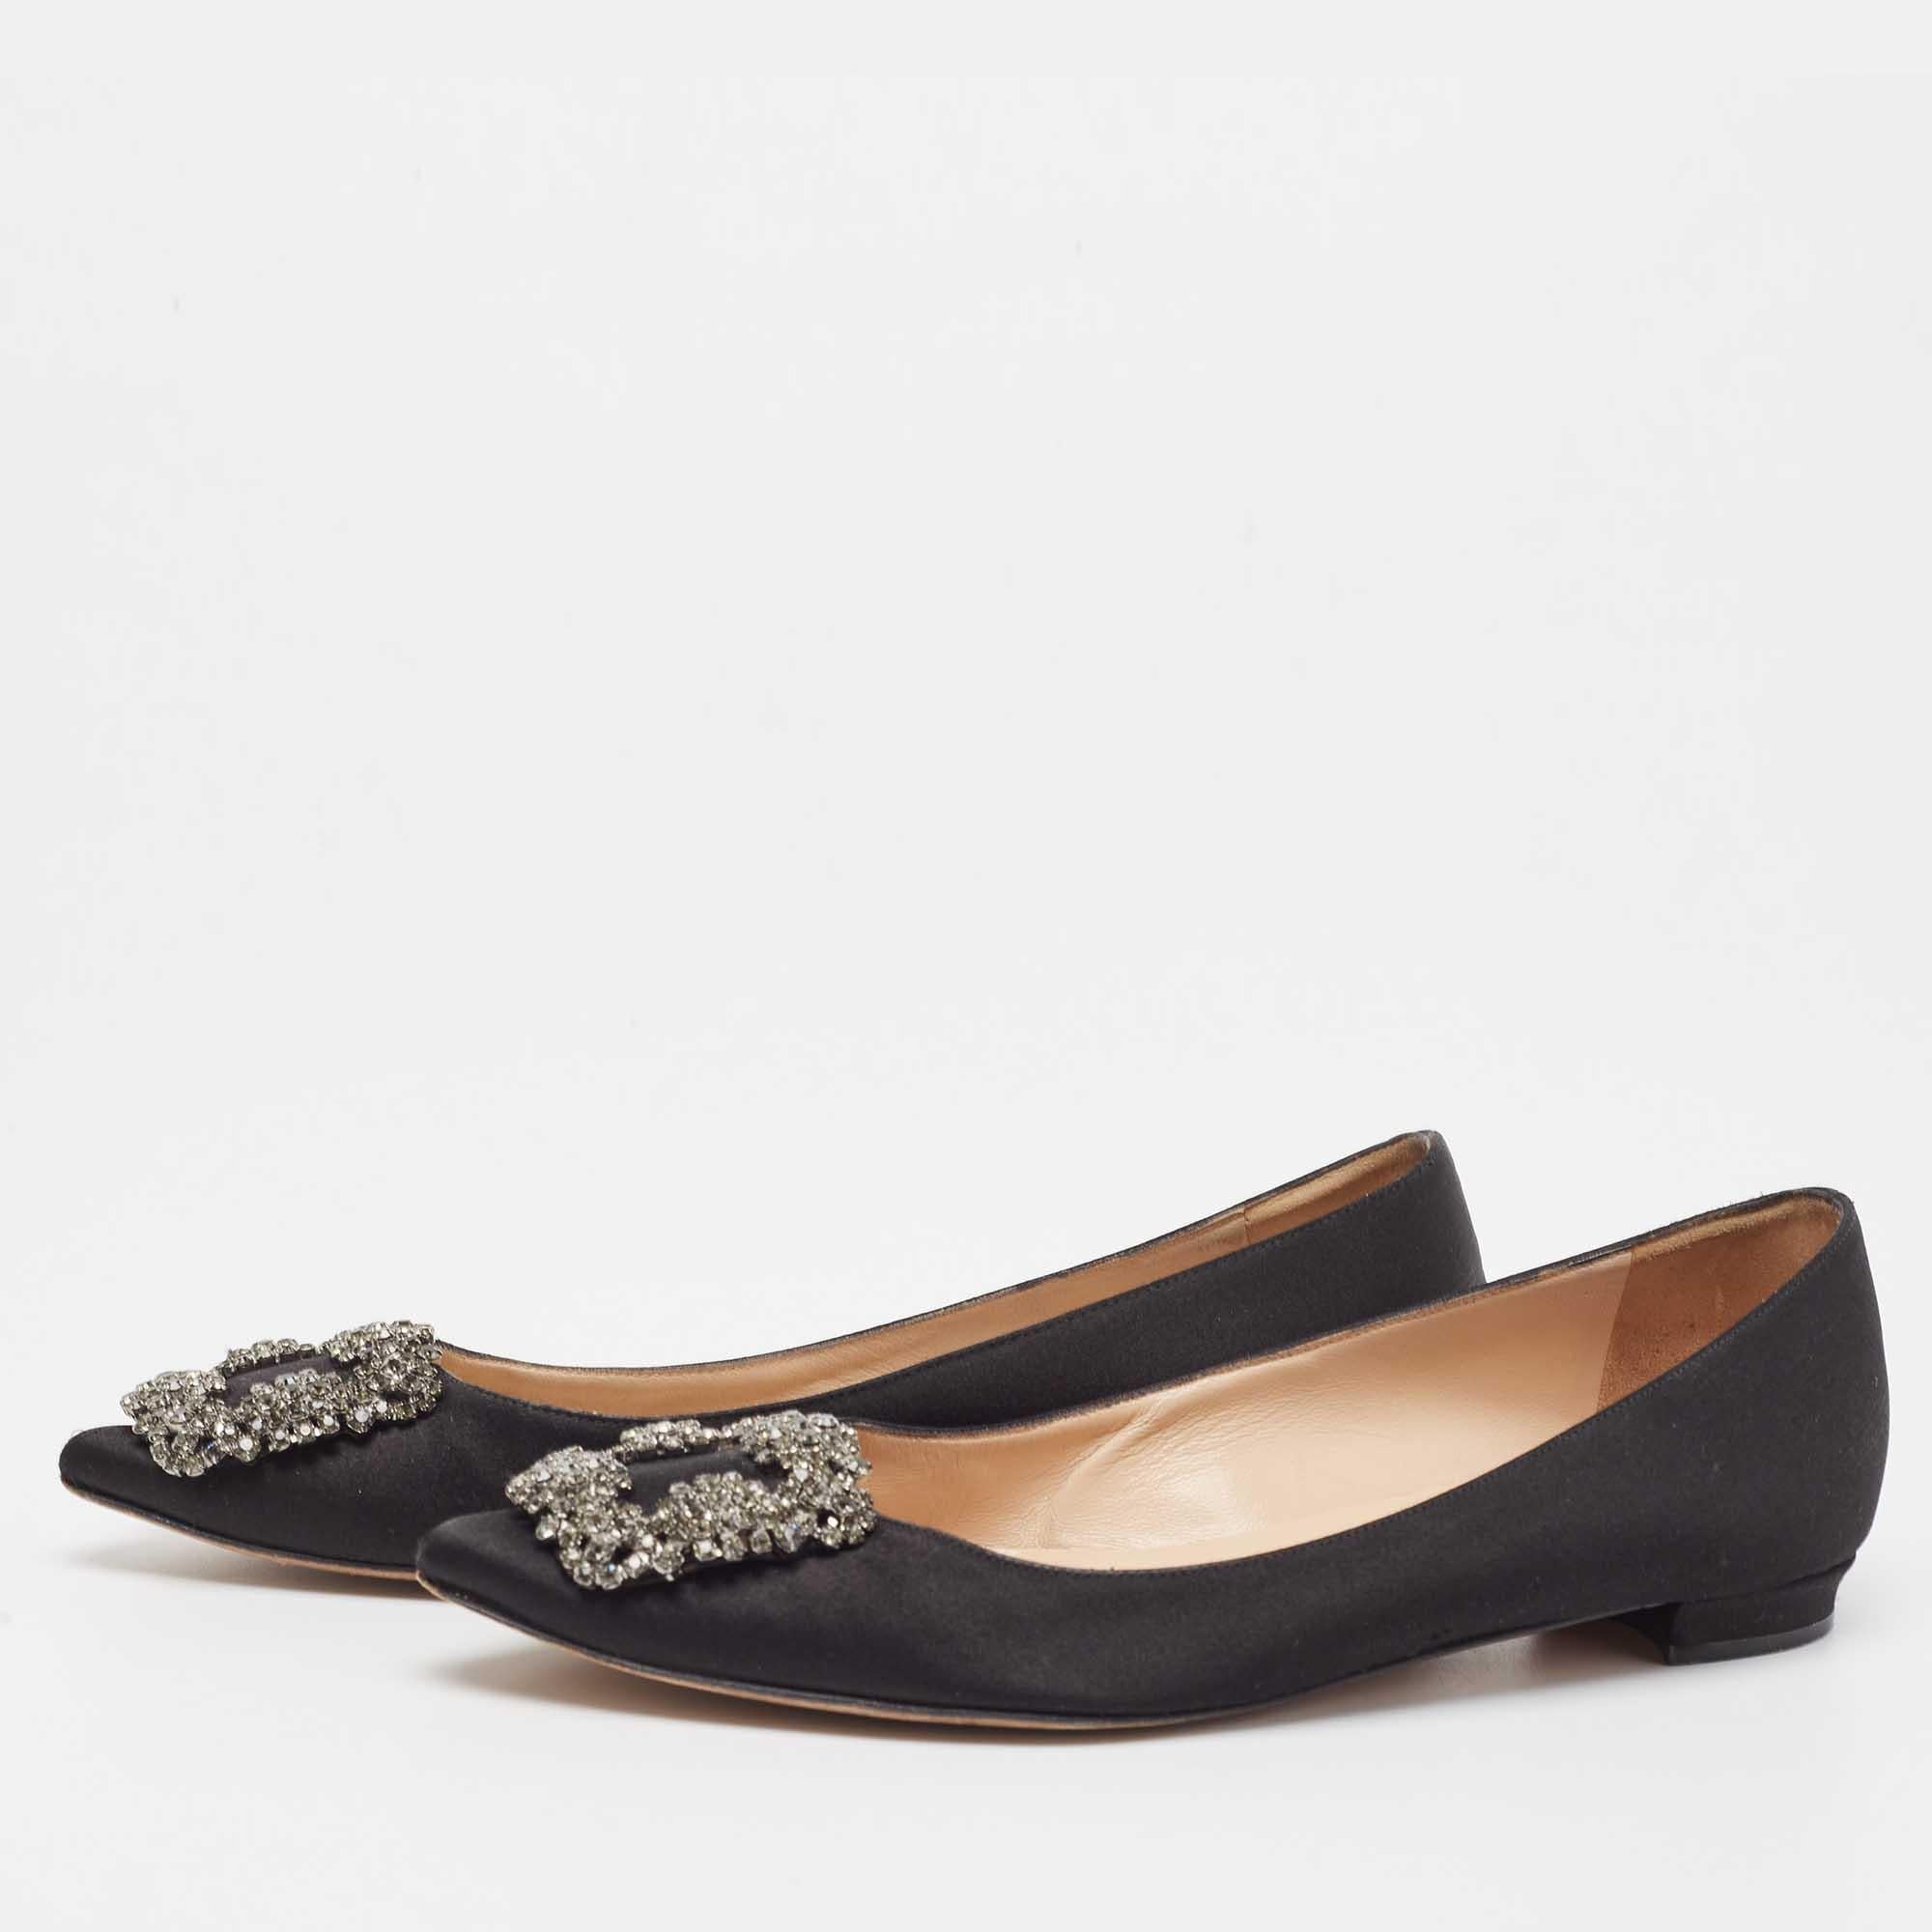 Topped with crystal embellishment on the toes, these Manolo Blahnik ballet flats exemplify grace and beauty. They are made from satin with a slip-on fitting for convenience and are set on durable soles.

